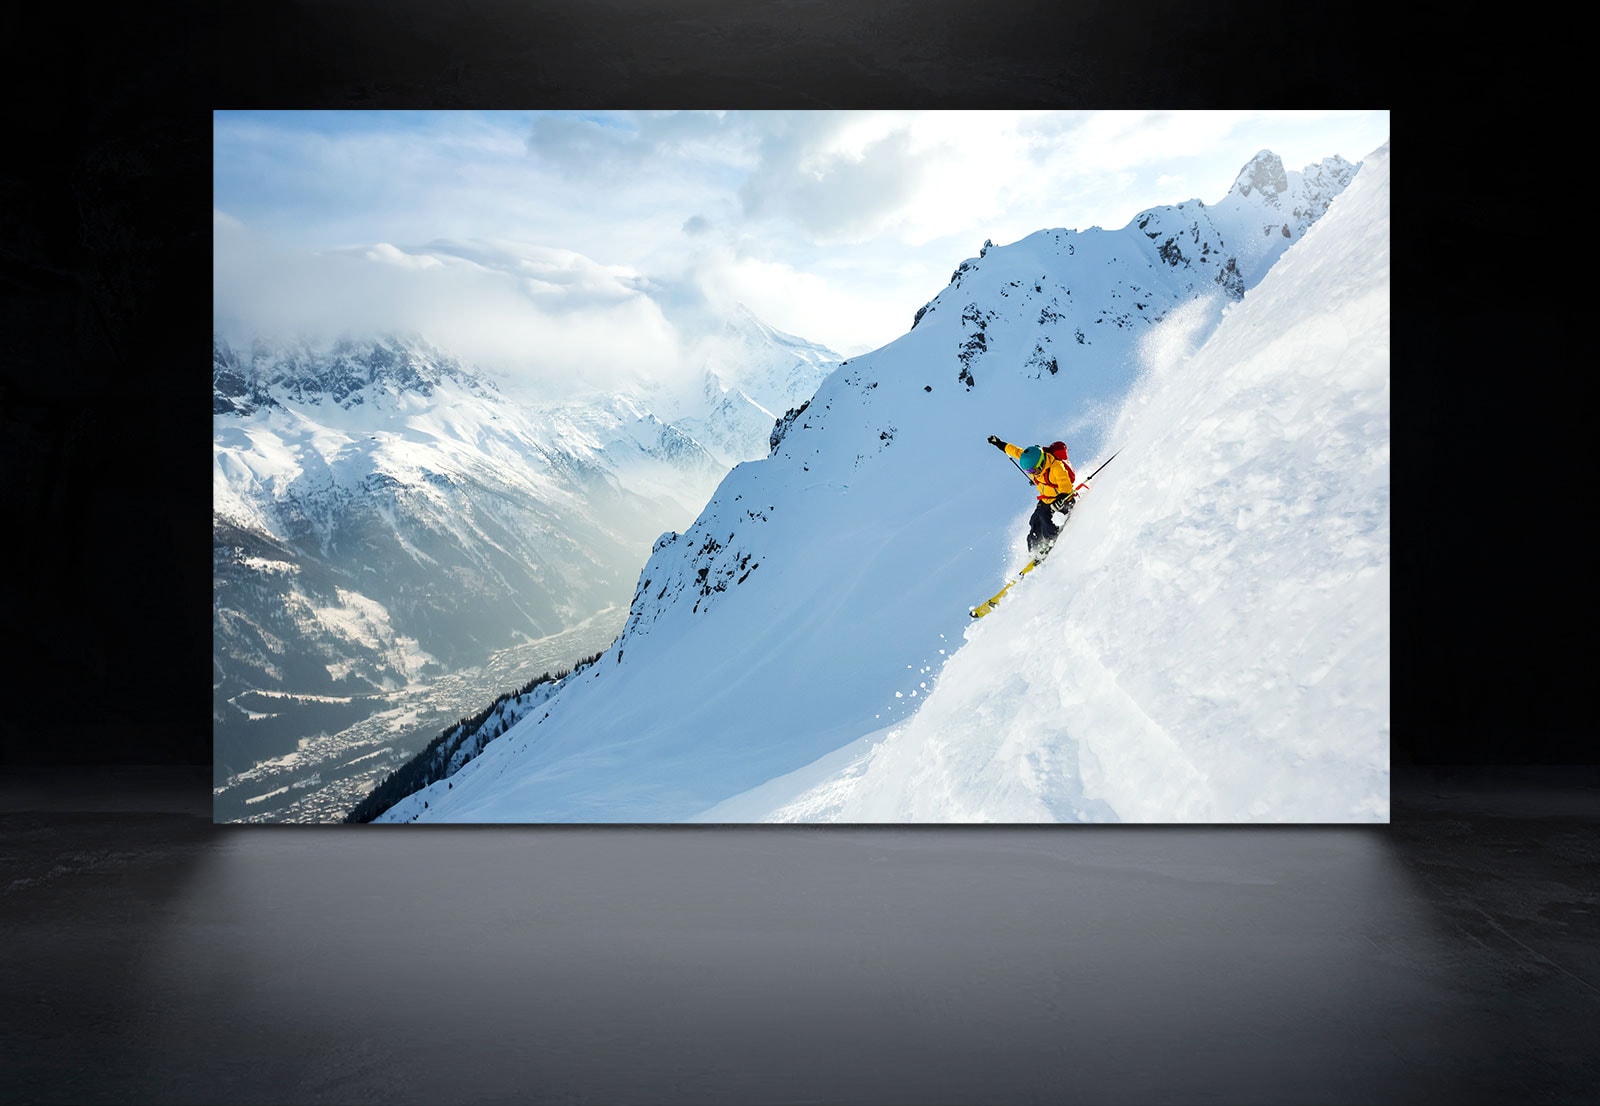 A TV screen displaying a scene of a man skiing in the snowy mountains both on LG OLED and LG OLED evo to express the difference in brightness and sharpness of the image. (play the video)